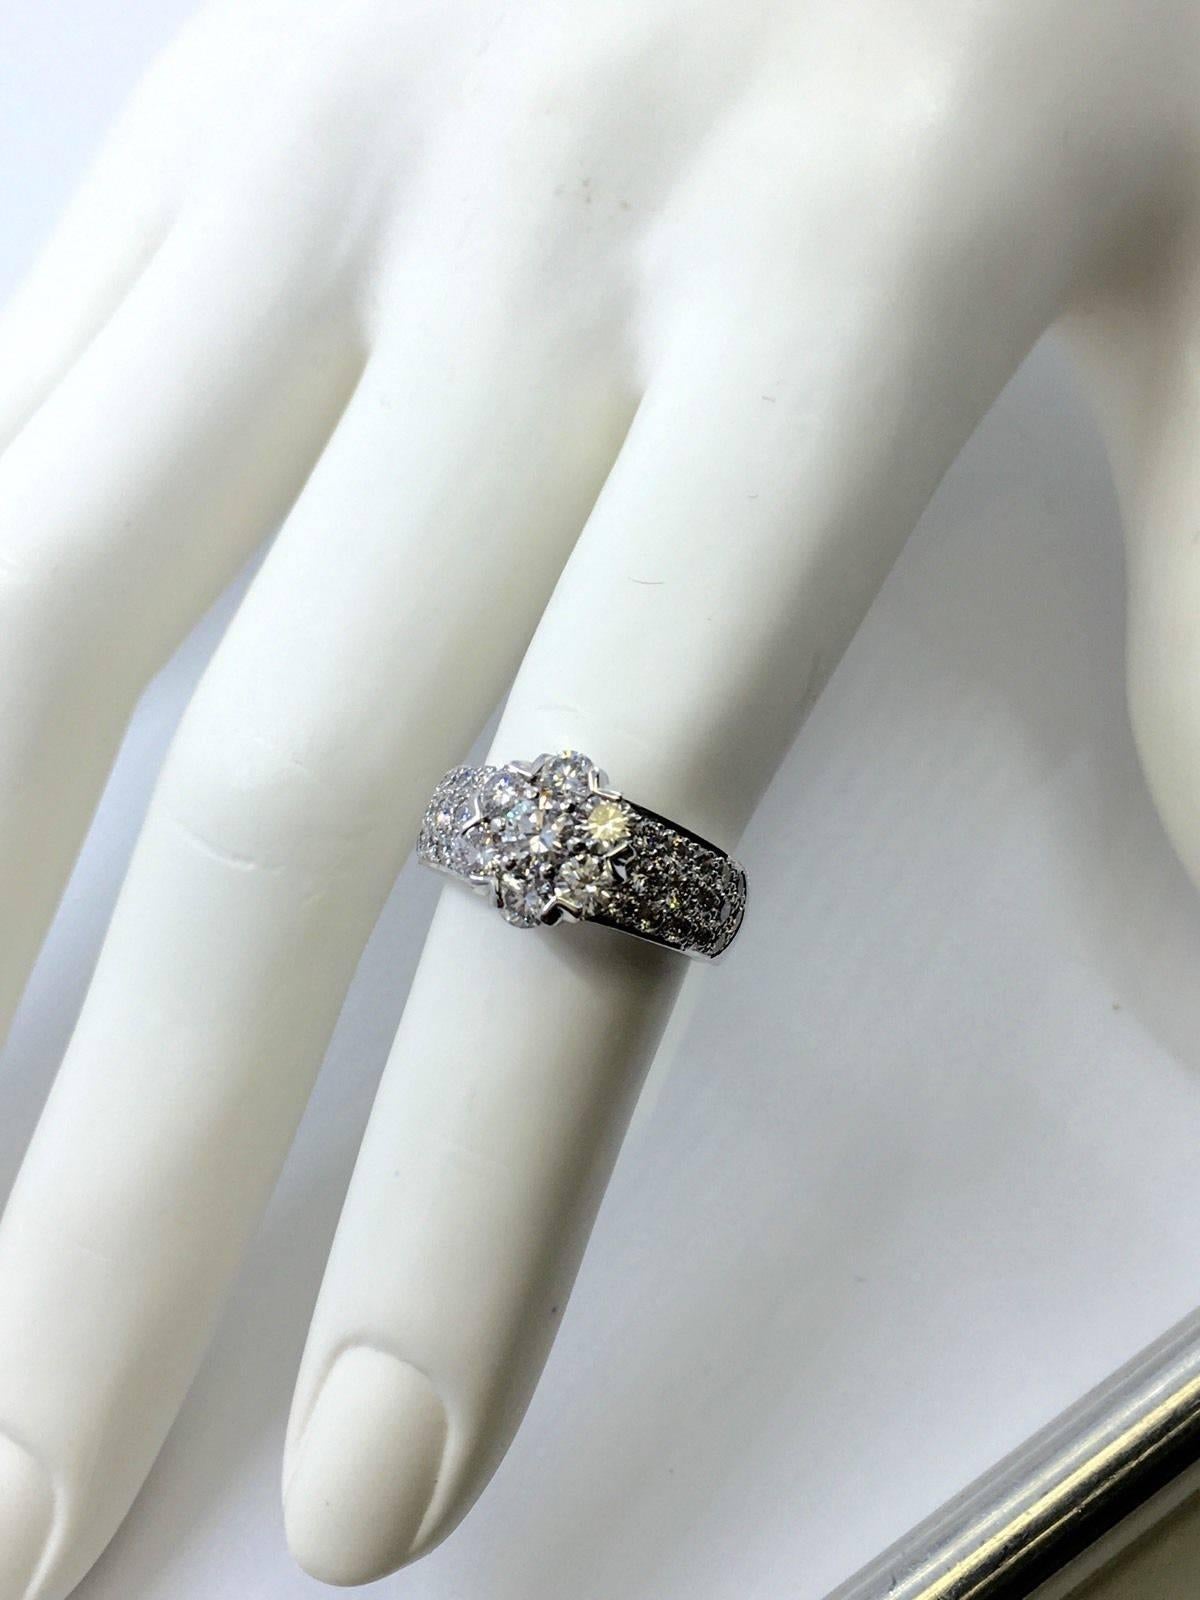 Van Cleef & Arpels Large Diamond Fleurette Floral Ring In Excellent Condition For Sale In Miami, FL